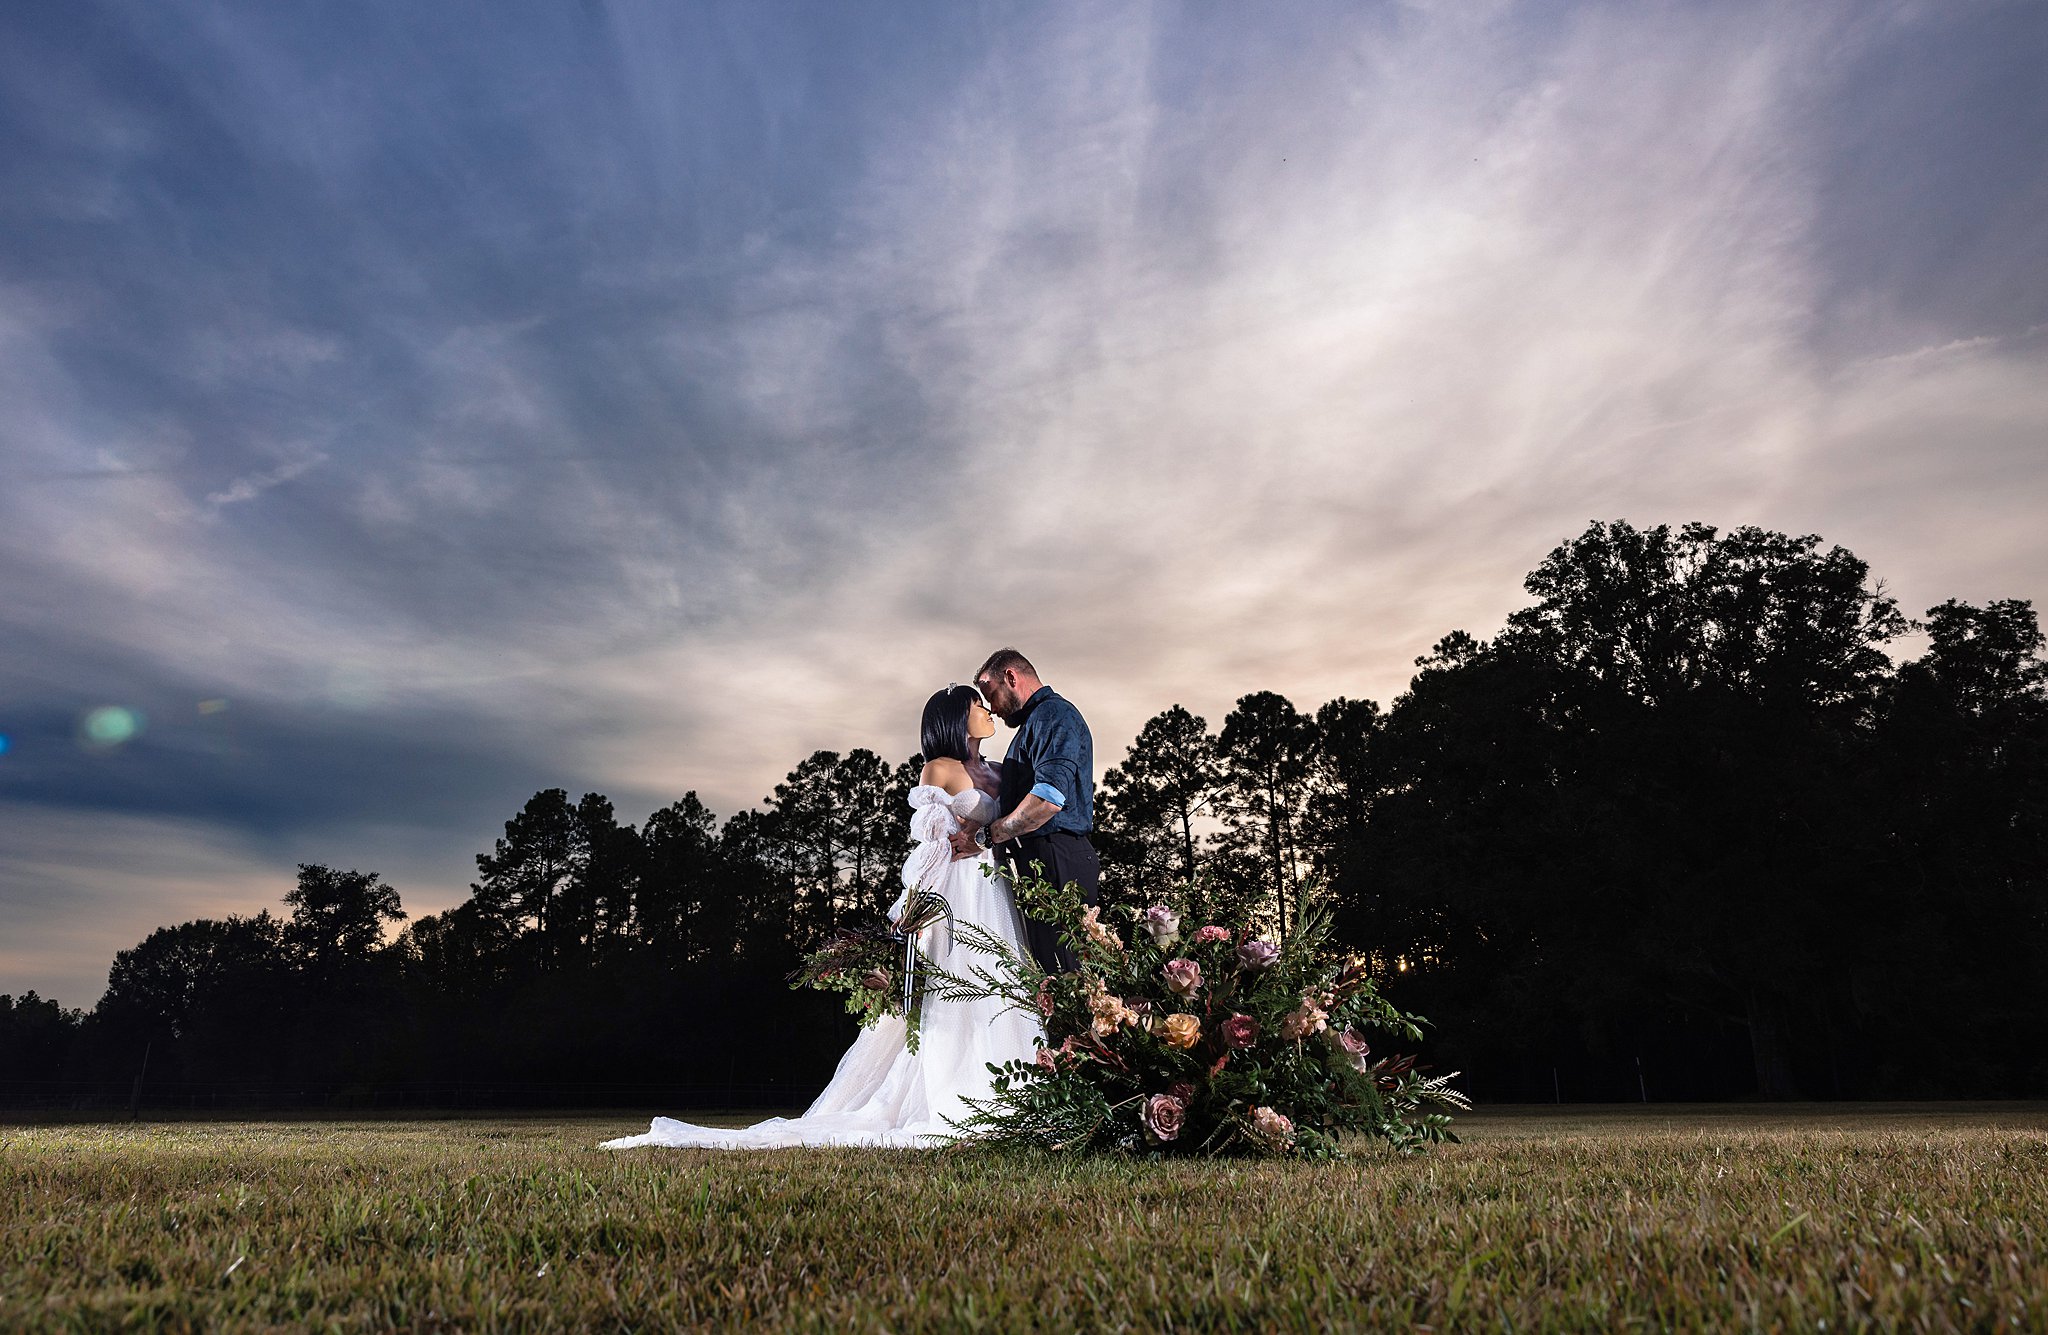 Newlyweds lean in for a kiss in an open field with an epic Florida sunset